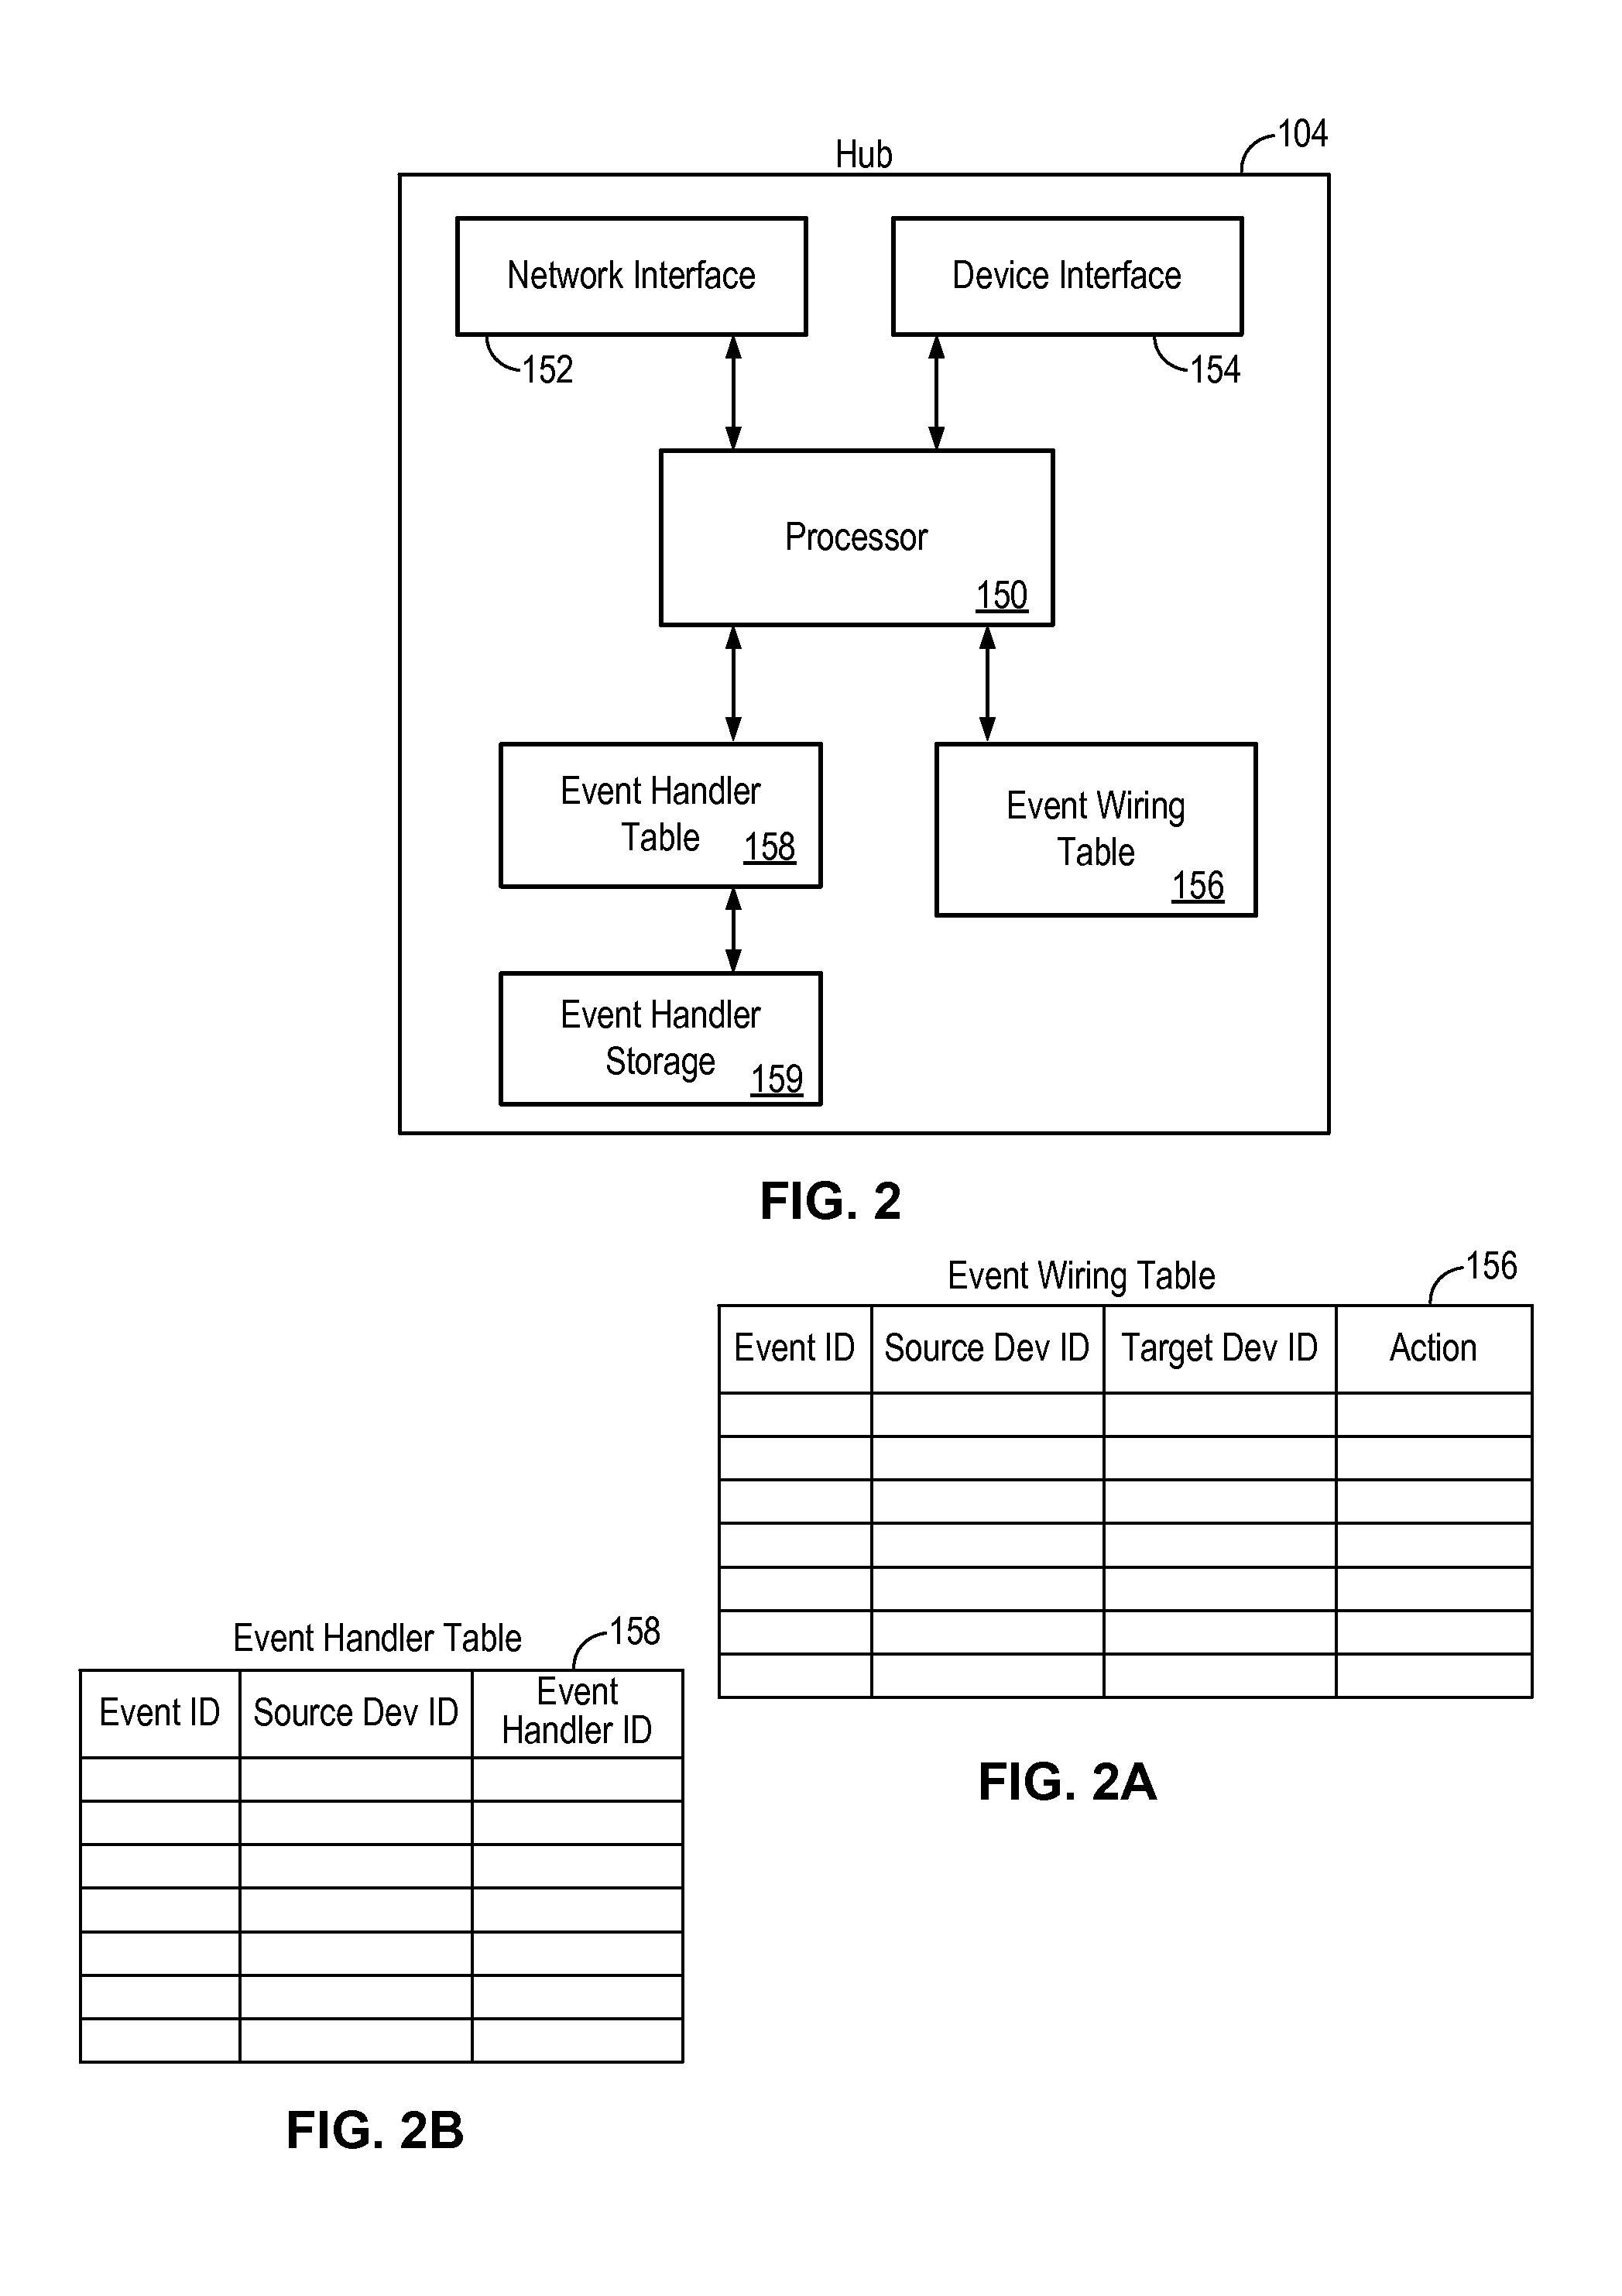 Distributed control scheme for remote control and monitoring of devices through a data network